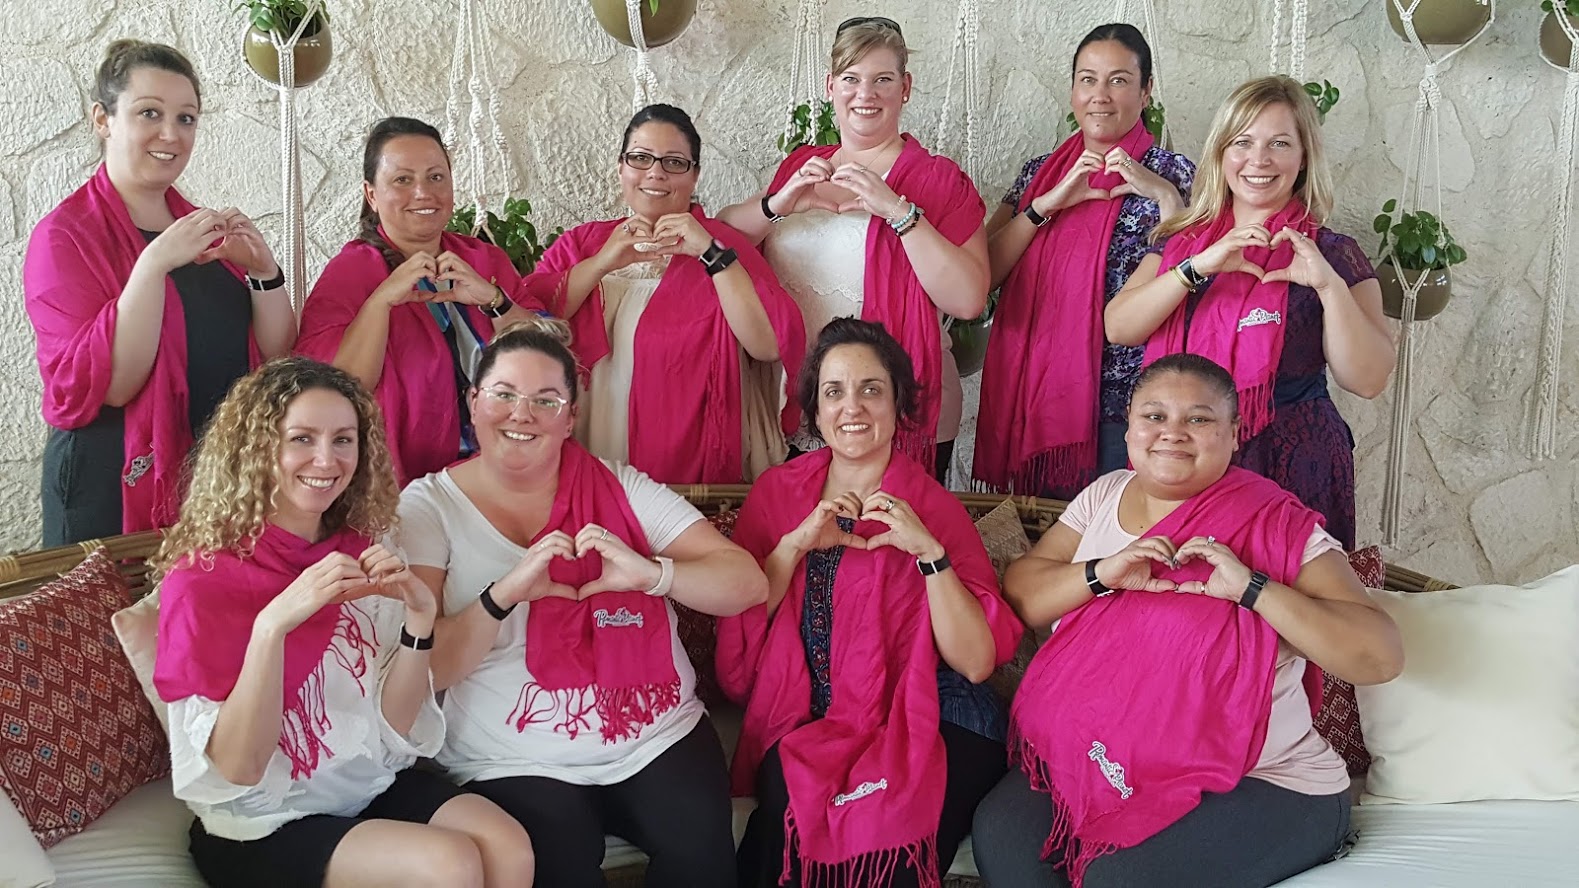 The team at Romantic Planet Vacations attends Love Mexico in Hotel Xcaret